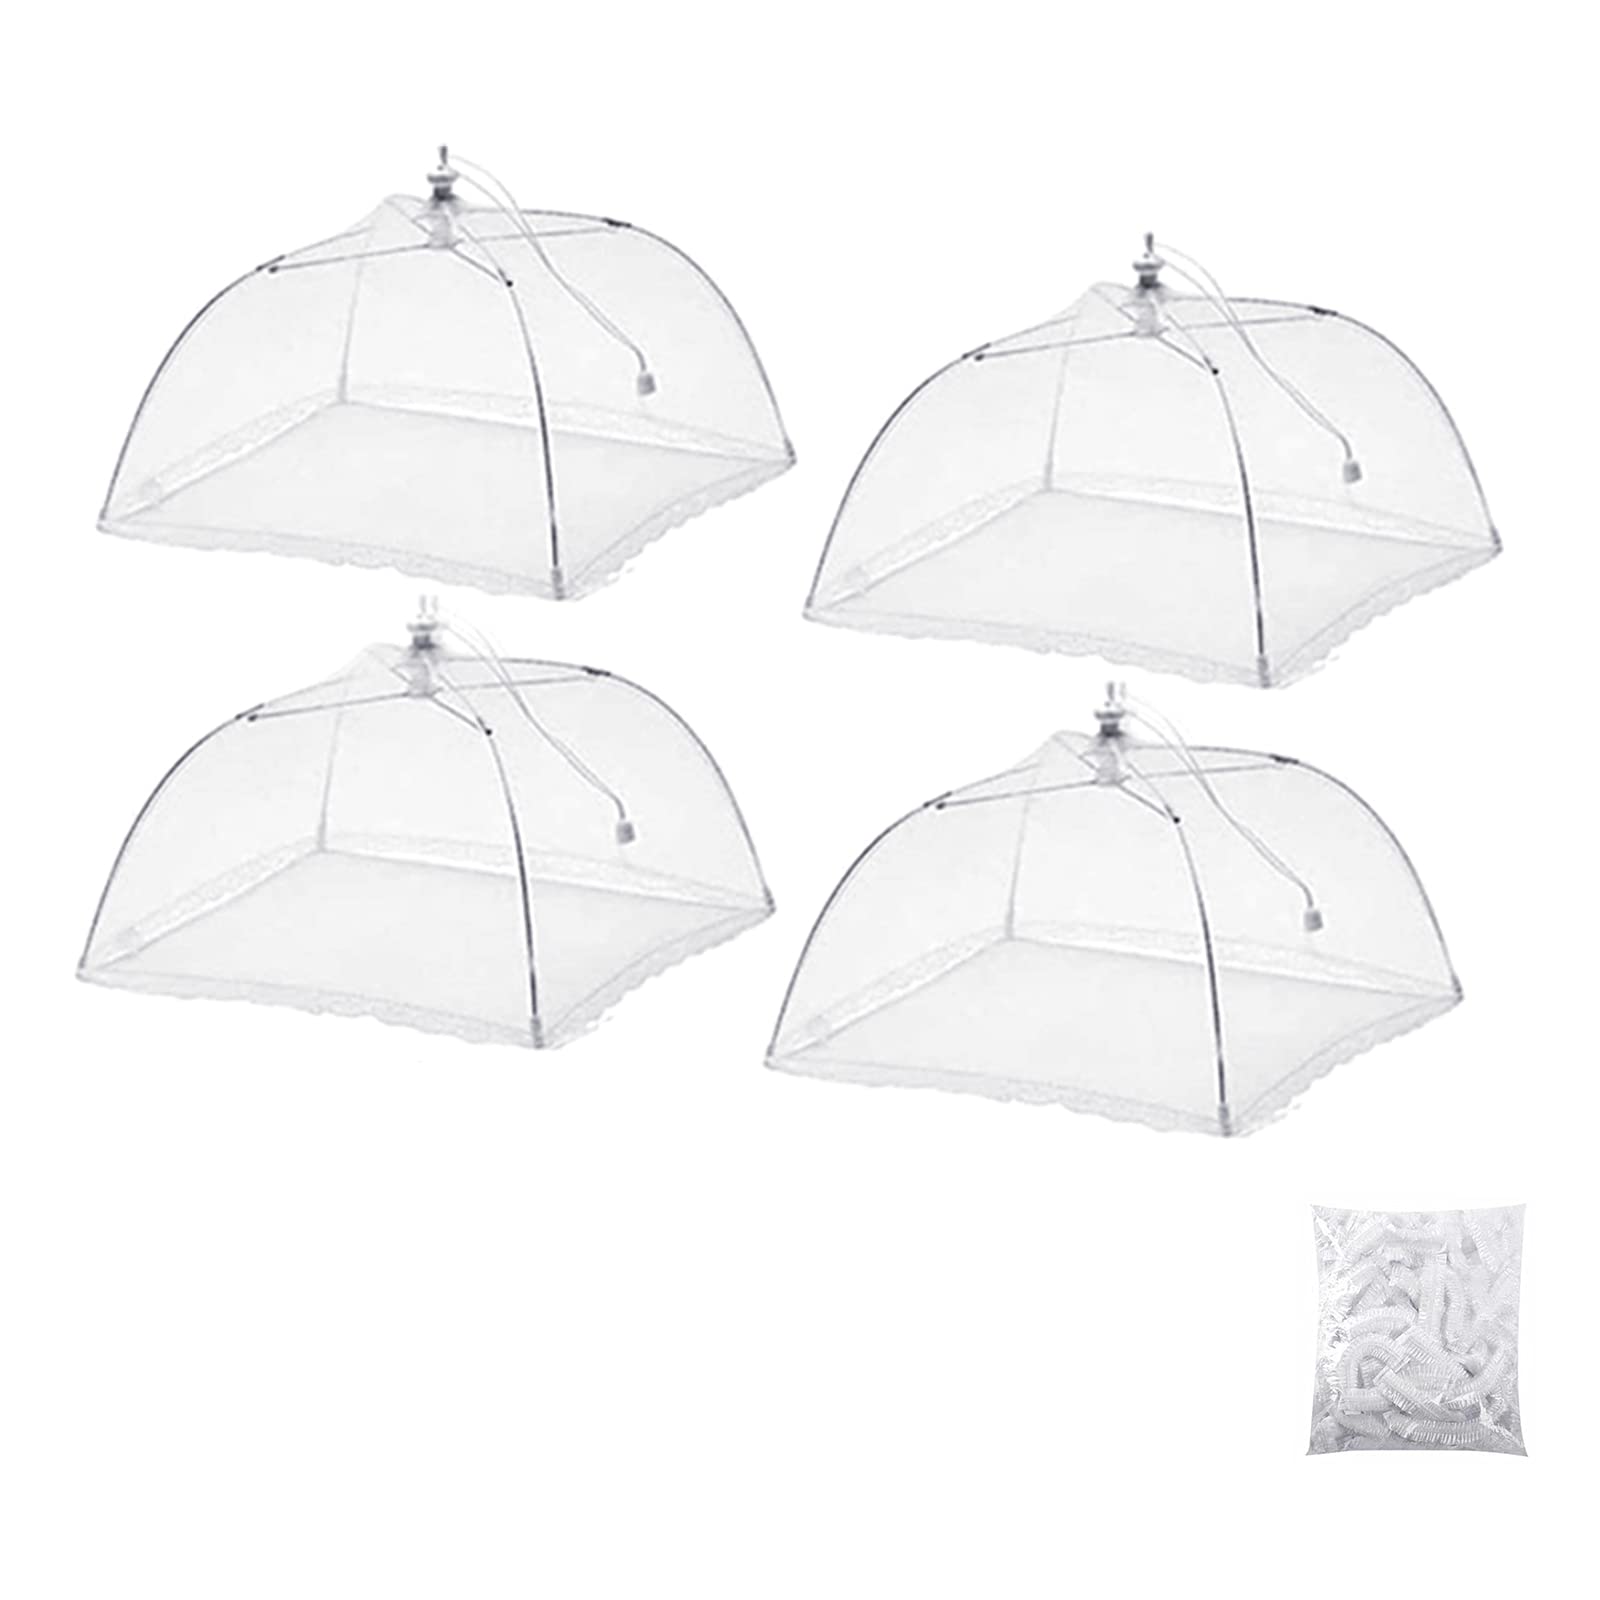 11 X MESH FOOD COVER TENT,ASKYW WHITE NYLON COVERS, 4 PACK 17 INCHES POP-UP UMBRELLA SCREEN FOOD COVERS NET FOR OUTDOORS, PARTIES PICNICS, BBQS, REUSABLE & COLLAPSIBLE - TOTAL RRP £101: LOCATION - RA